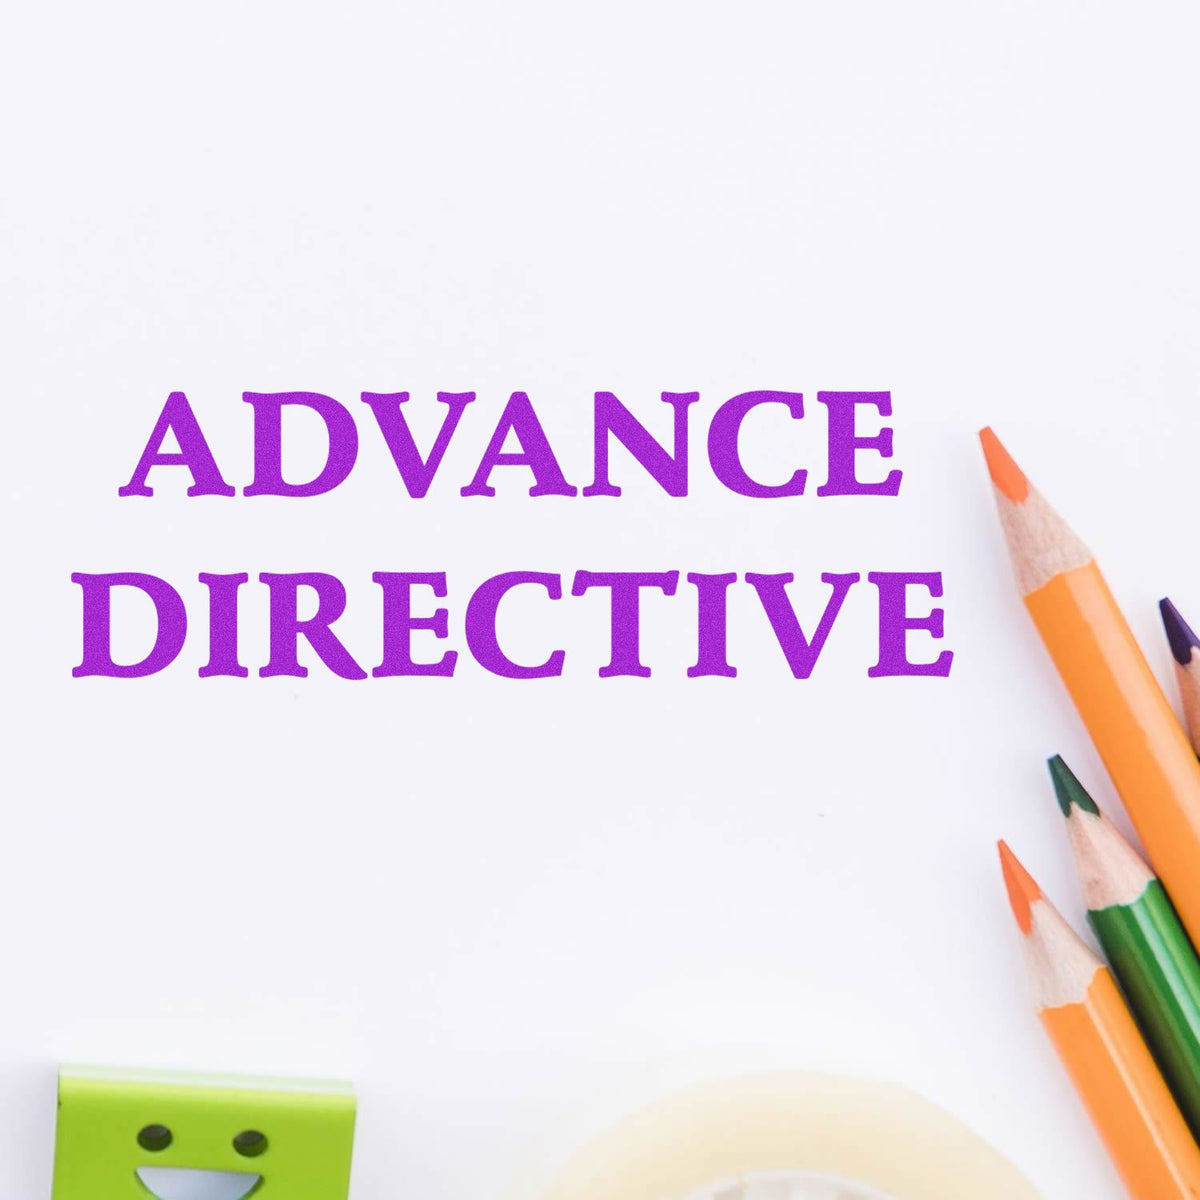 Advance Directive Rubber Stamp In Use